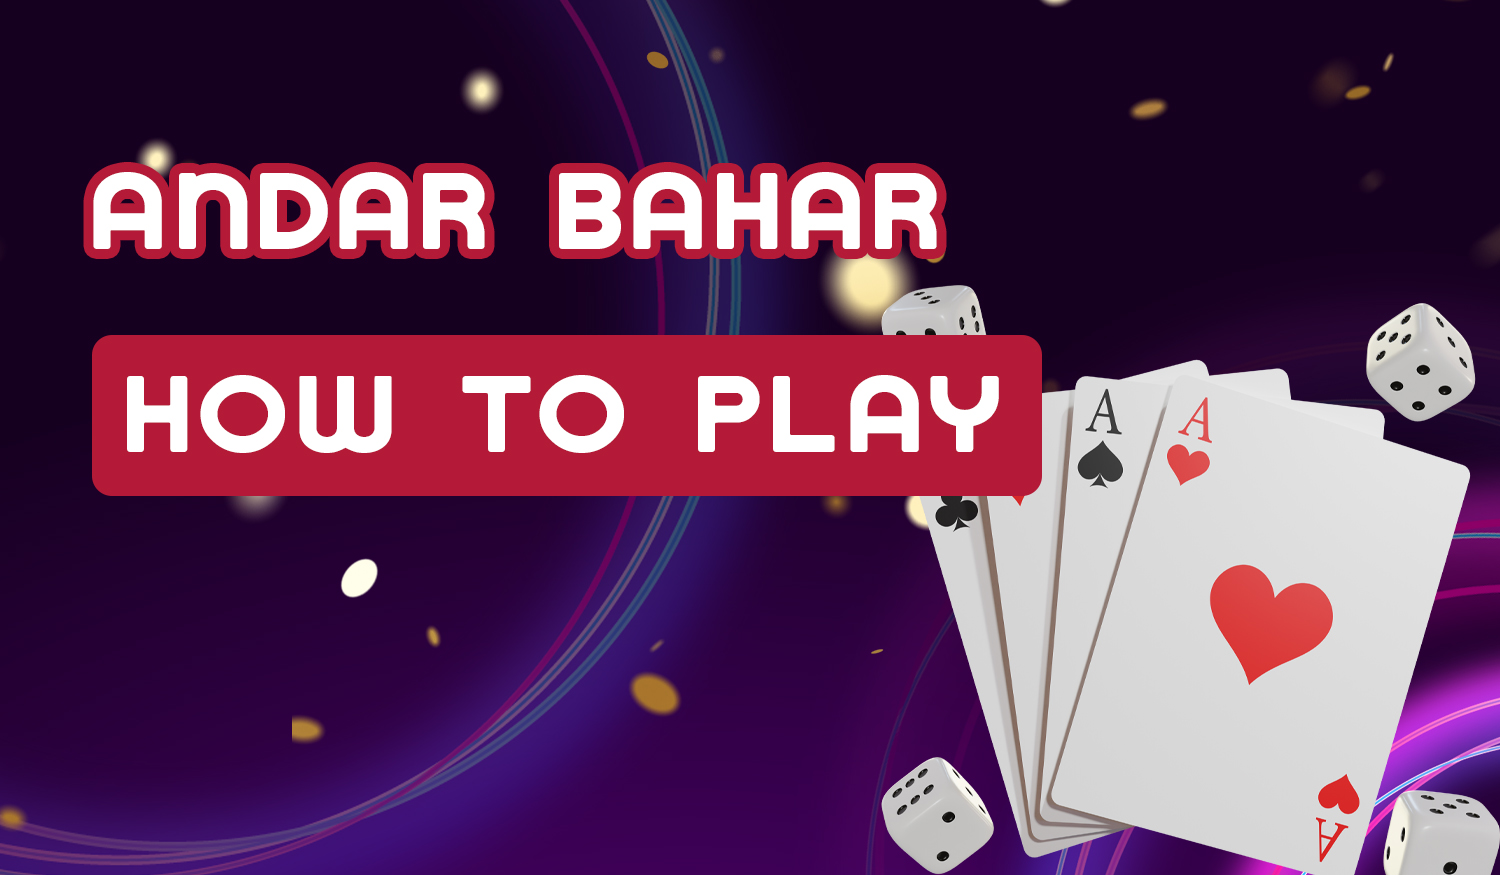 How Indian users can start playing Andar Bahar